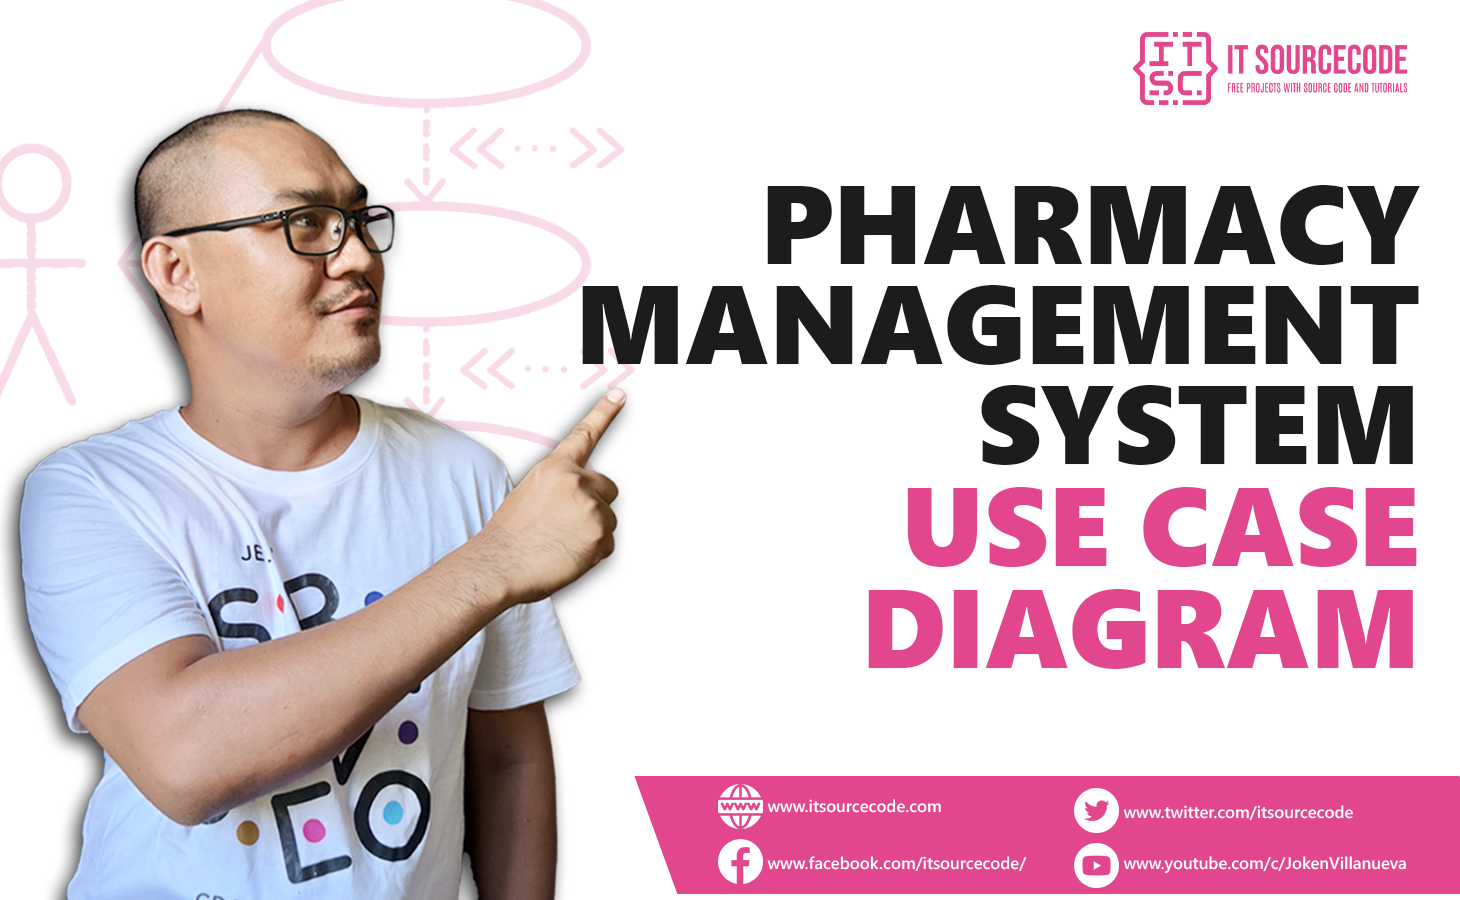 Use Case Diagram for Pharmacy Management System